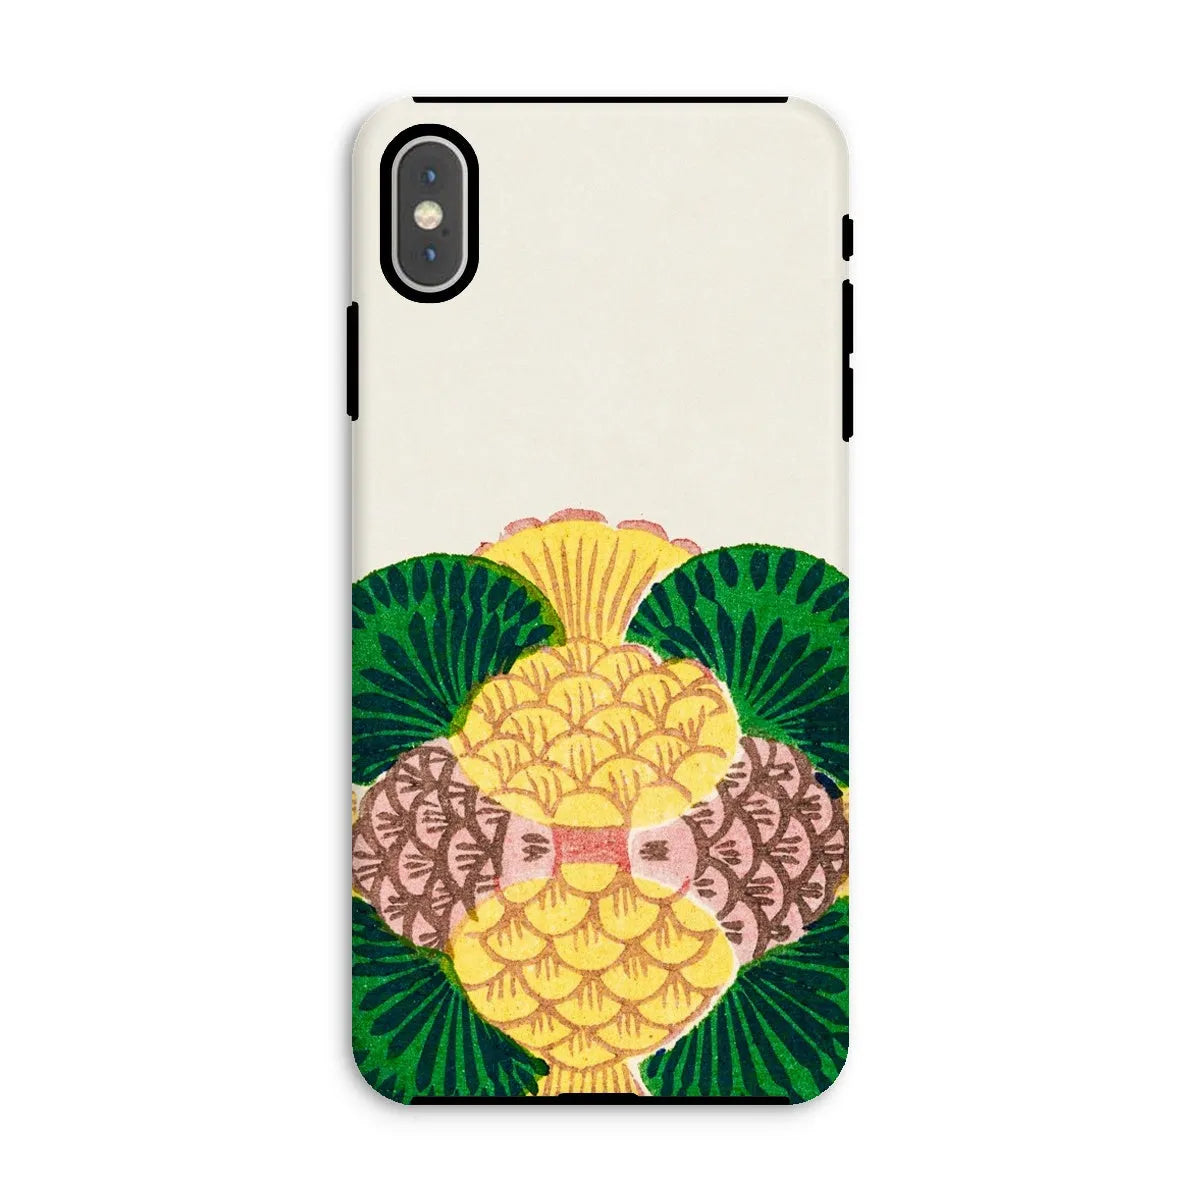 Graphic Bloom - Taguchi Tomoki Japanese Floral Art Phone Case - Iphone Xs Max / Matte - Mobile Phone Cases - Aesthetic